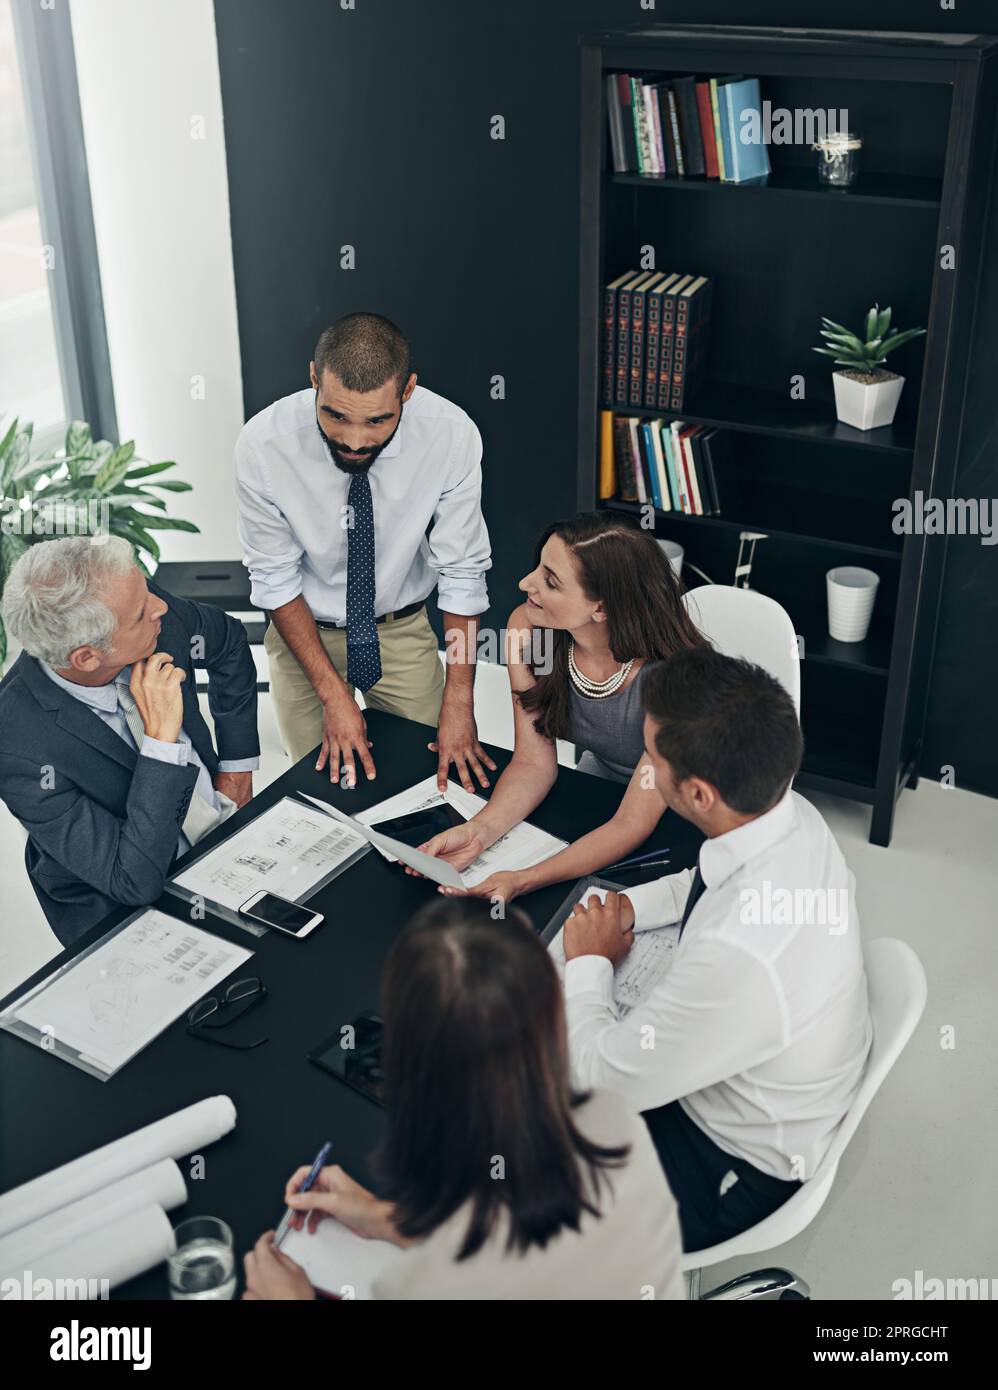 Discussing the way forward. High angle shot of a group of businesspeople meeting in the boardroom. Stock Photo